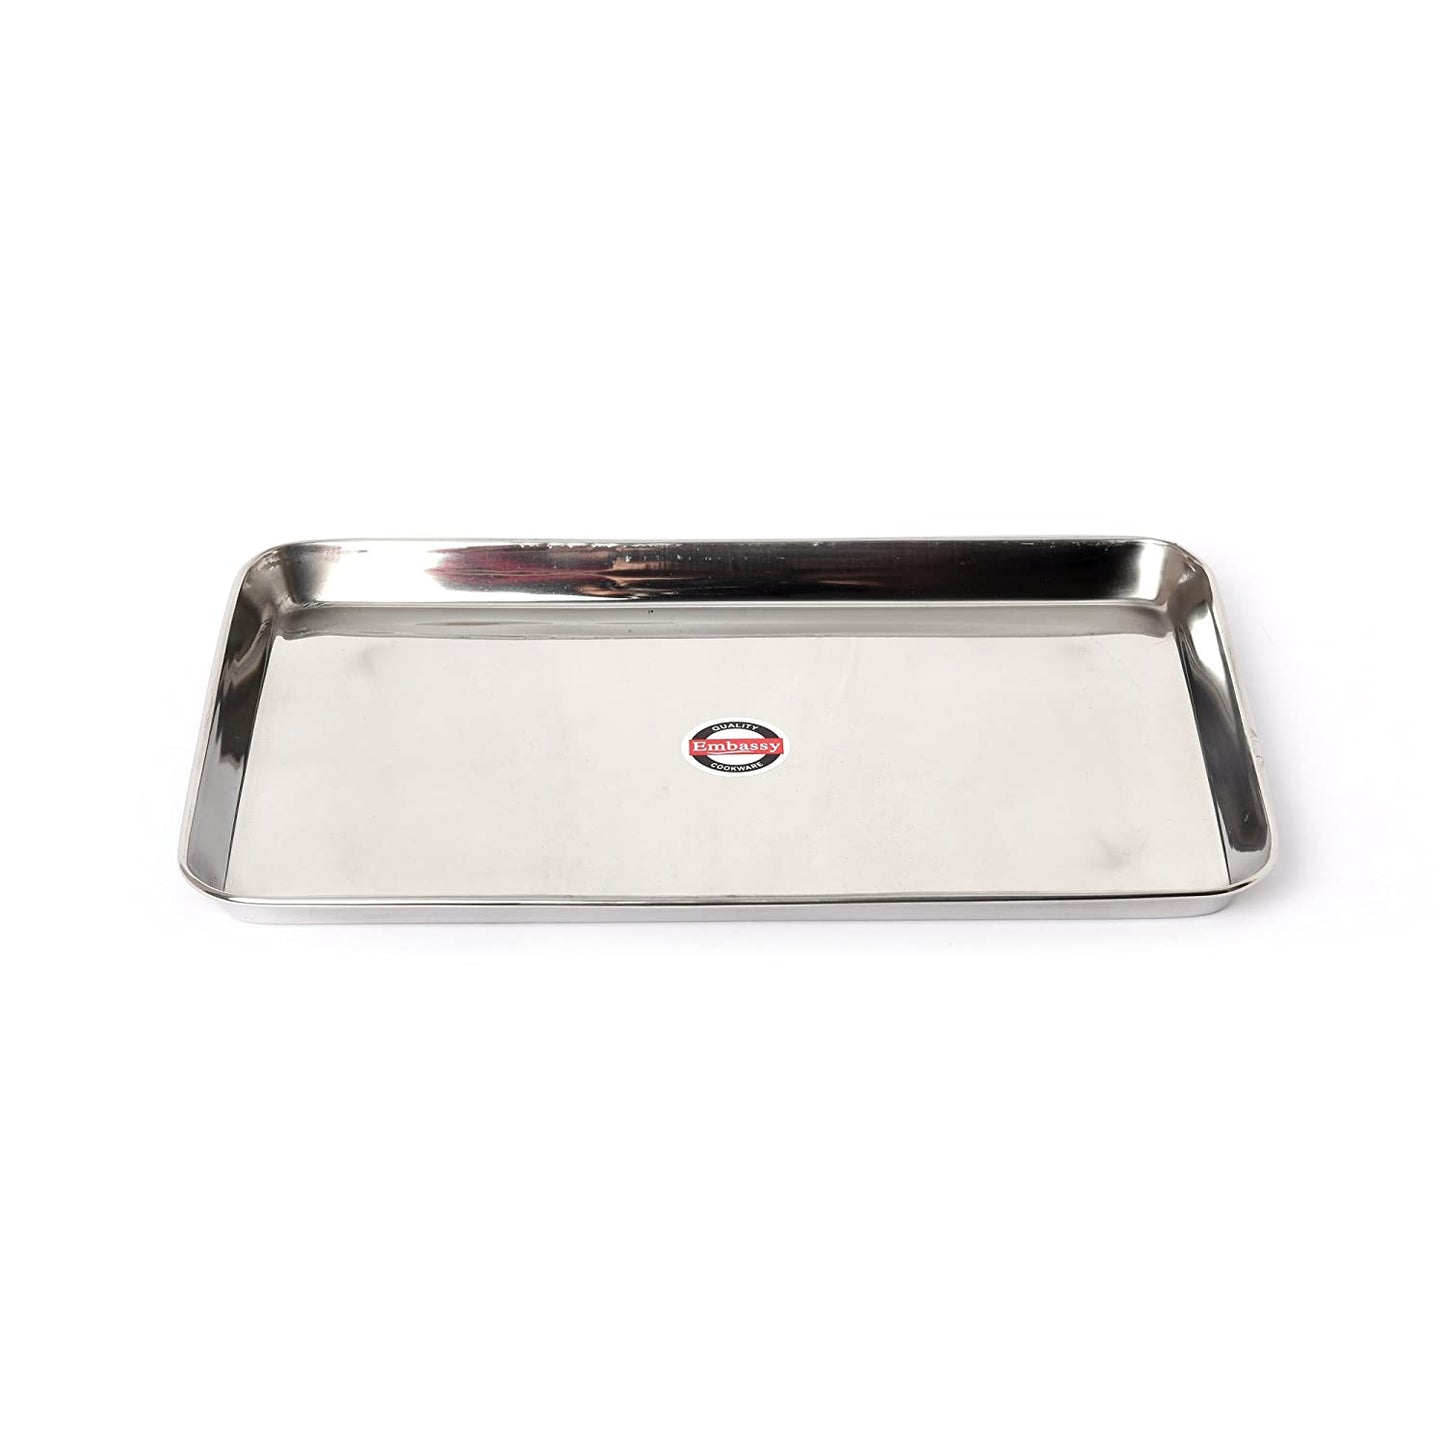 Embassy Deep Tray (Rectangle), Sizes 1 & 3, 18.5x29.5 cms & 25.5x36.9 cms (Pack of 2, Stainless Steel)